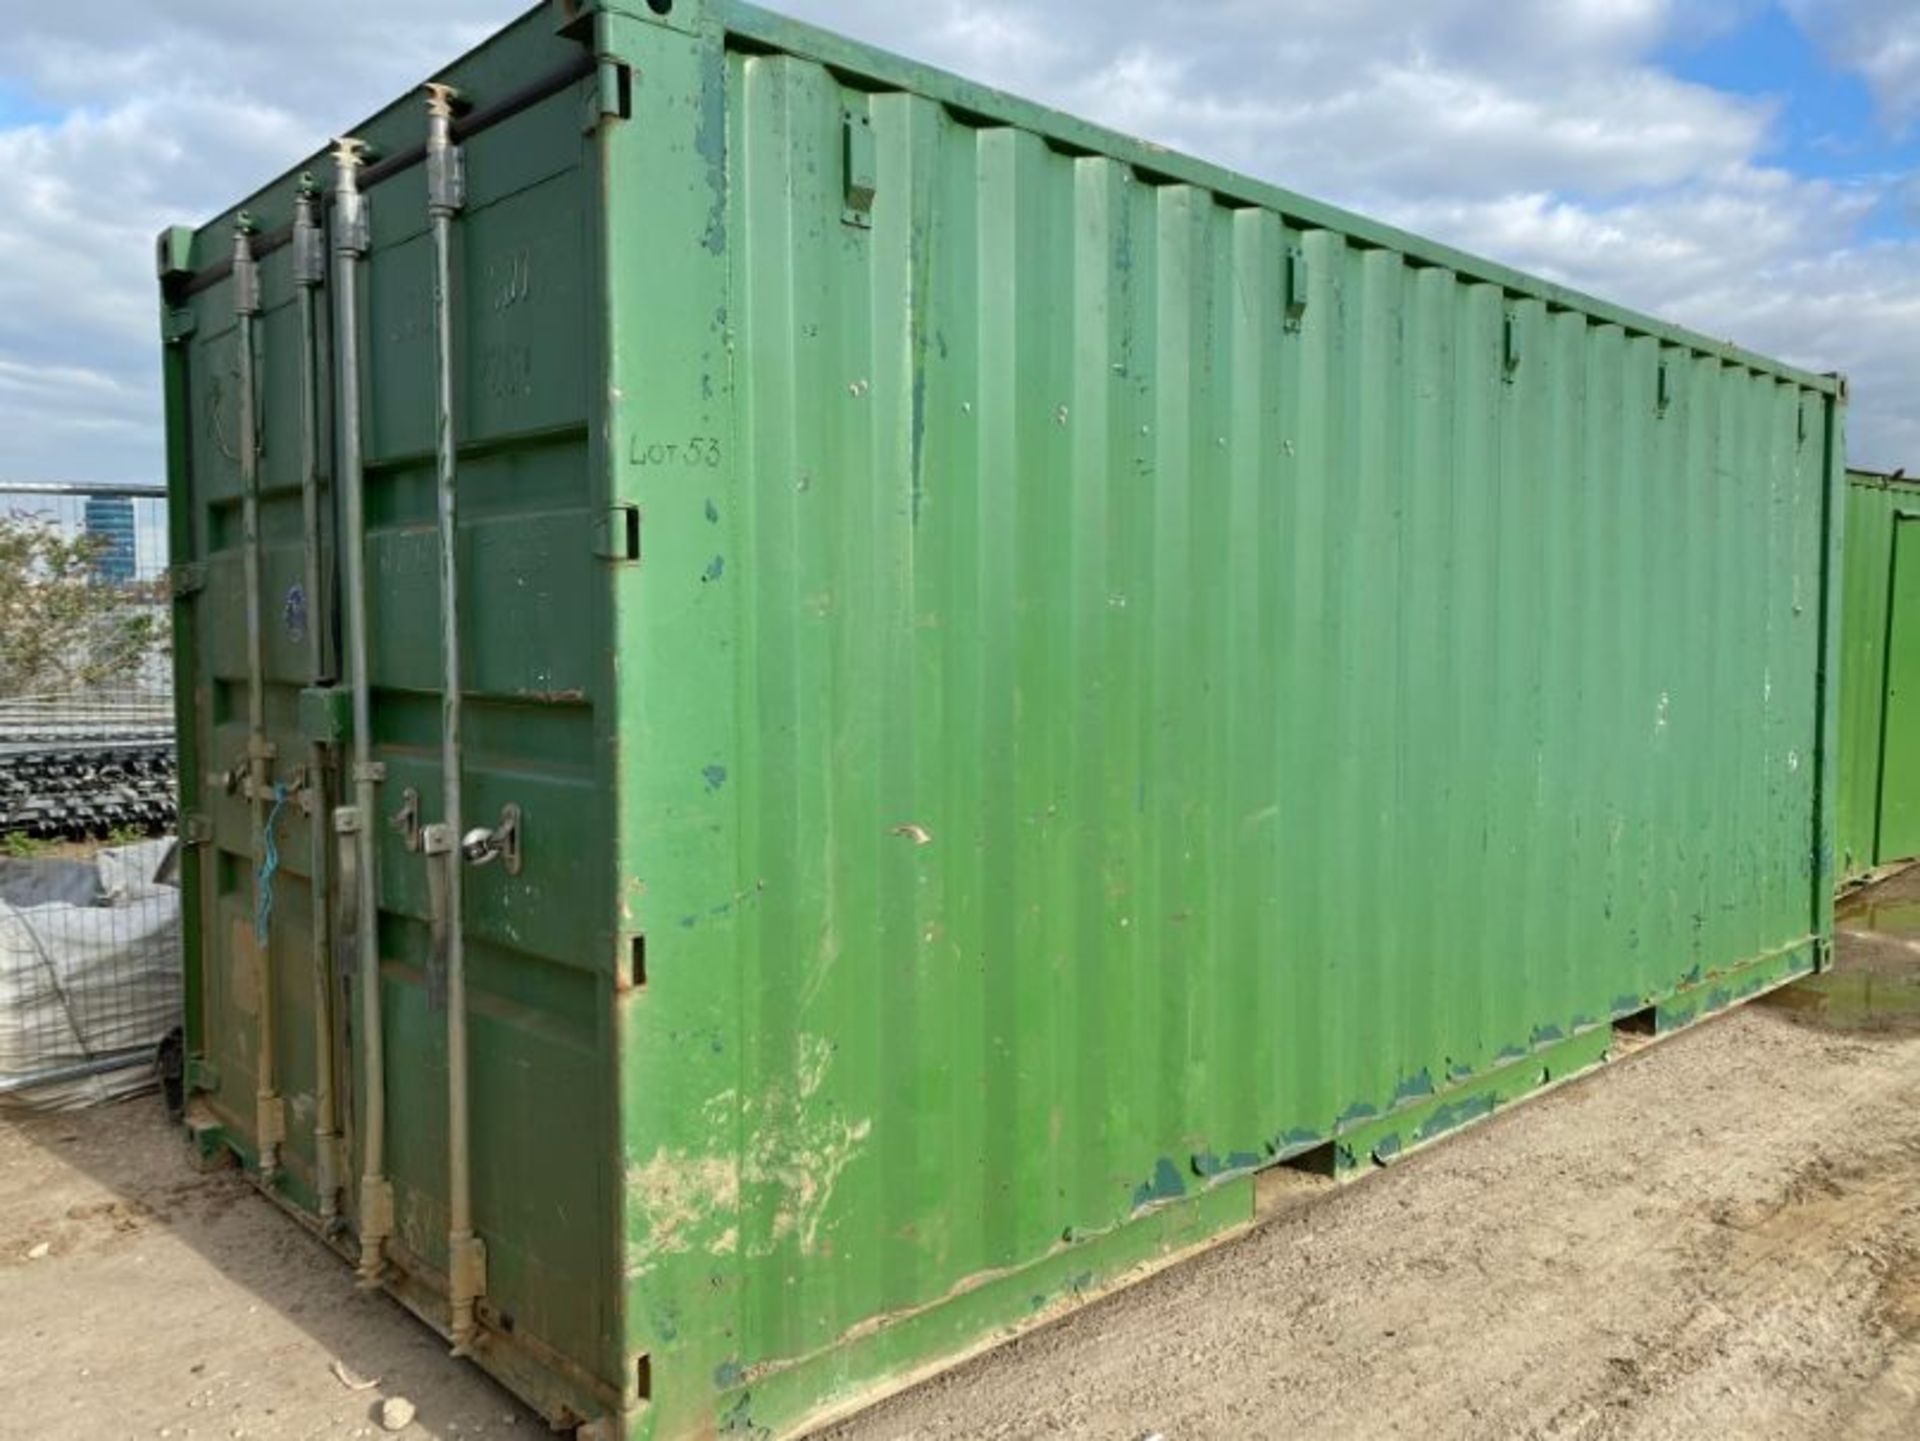 20' steel shipping container and contents as lotted